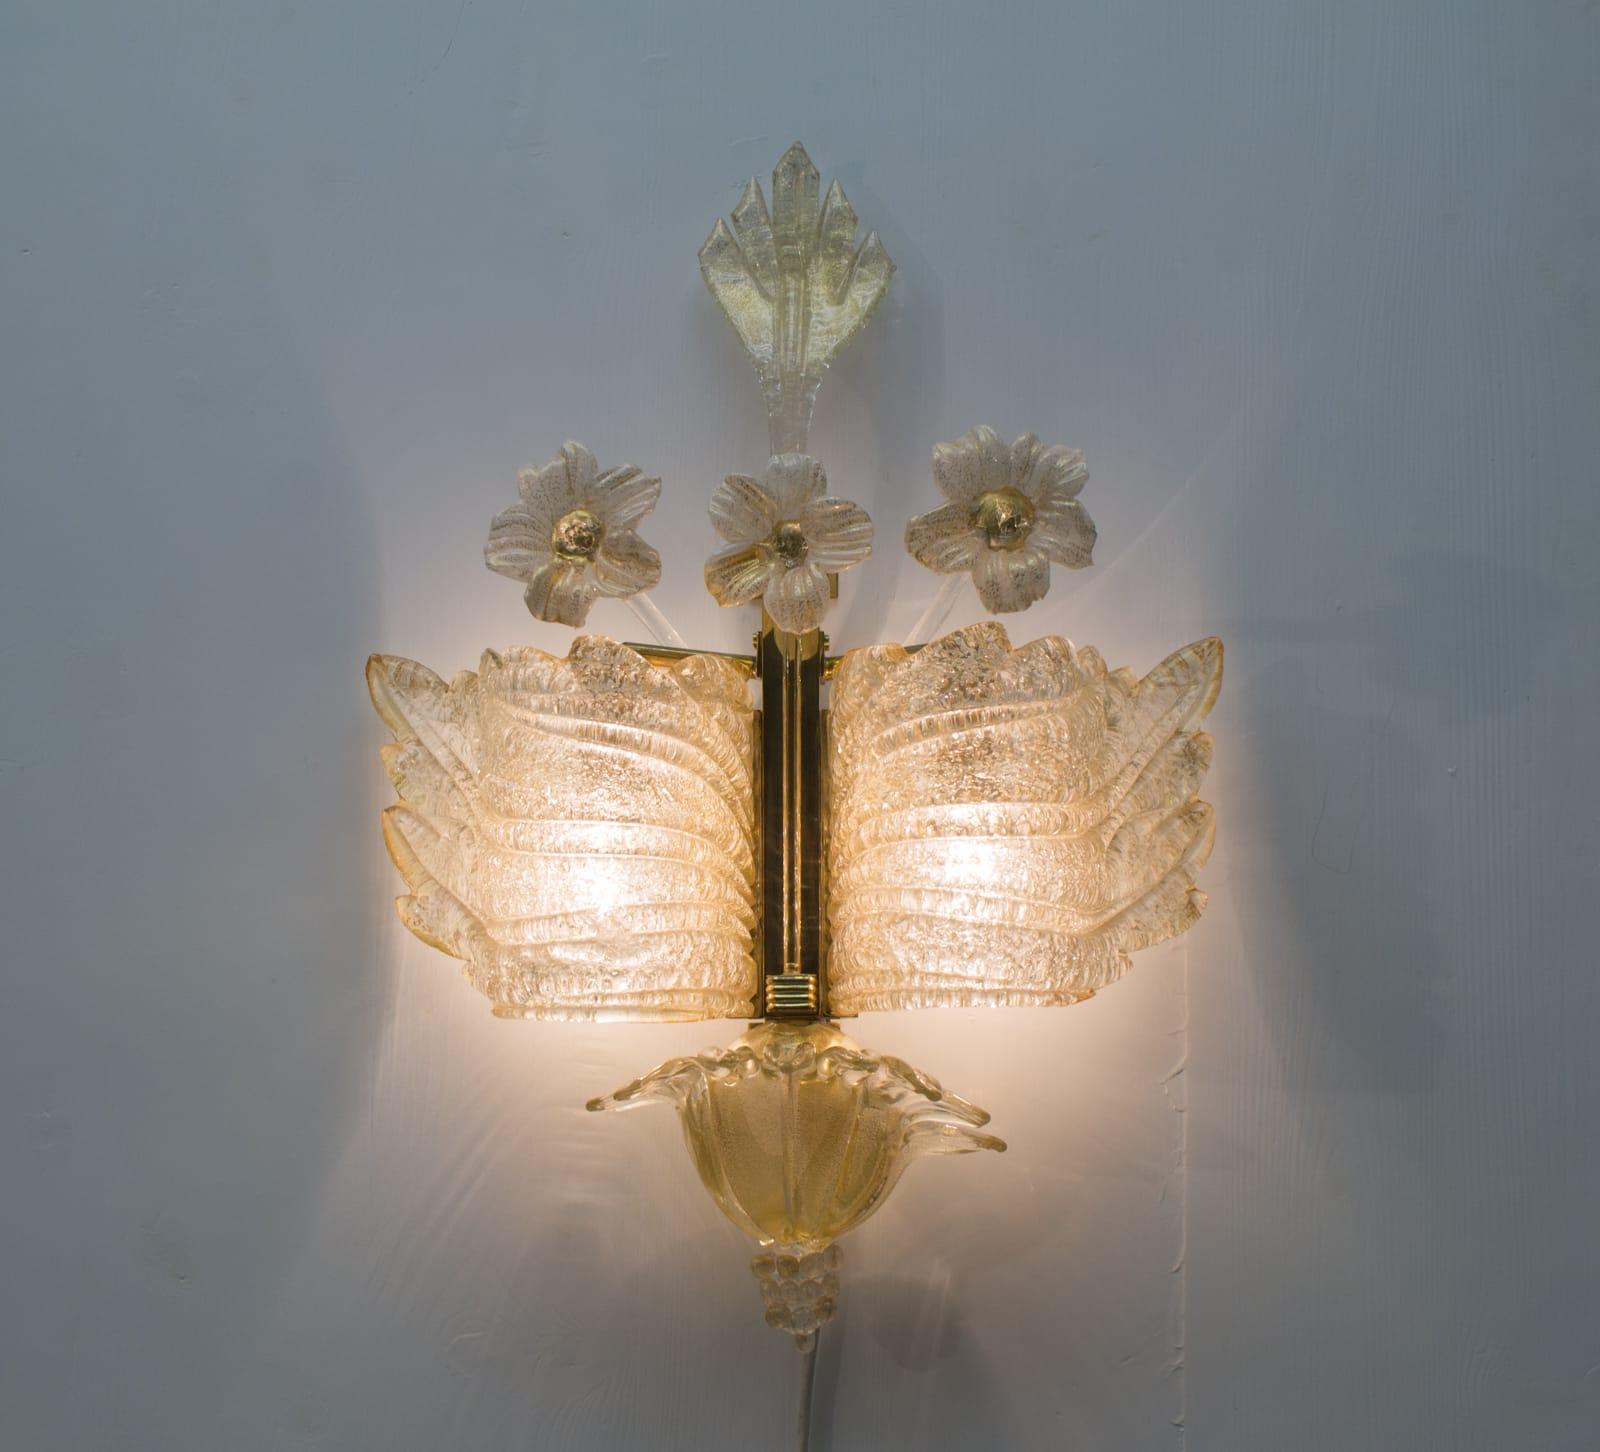 Rare and wonderful of wall light by Barovier & Toso.

One of the most celebrated of the Classic collections of Barovier & Toso, its elegant design and the color range enabling attractive and impressive decorative effects. 

Visible metal parts